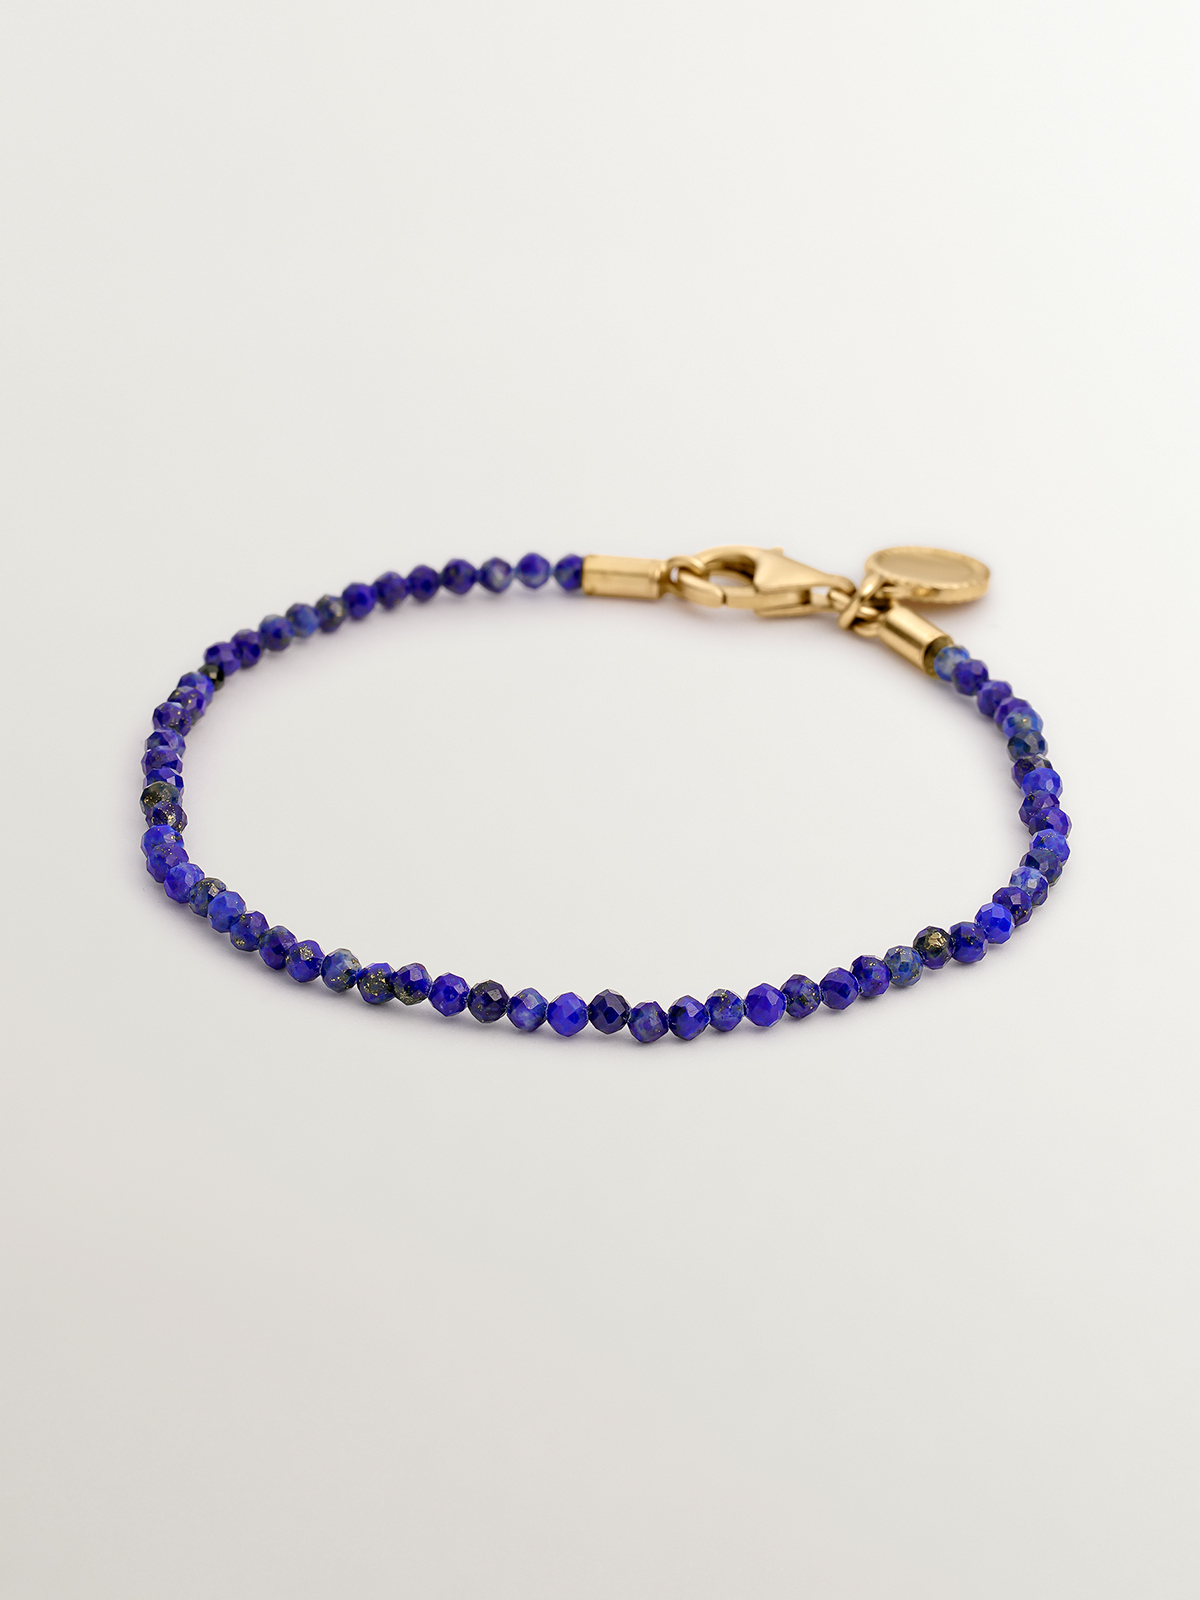 925 Sterling Silver bracelet plated in 18K Yellow Gold with Lapis Lazuli